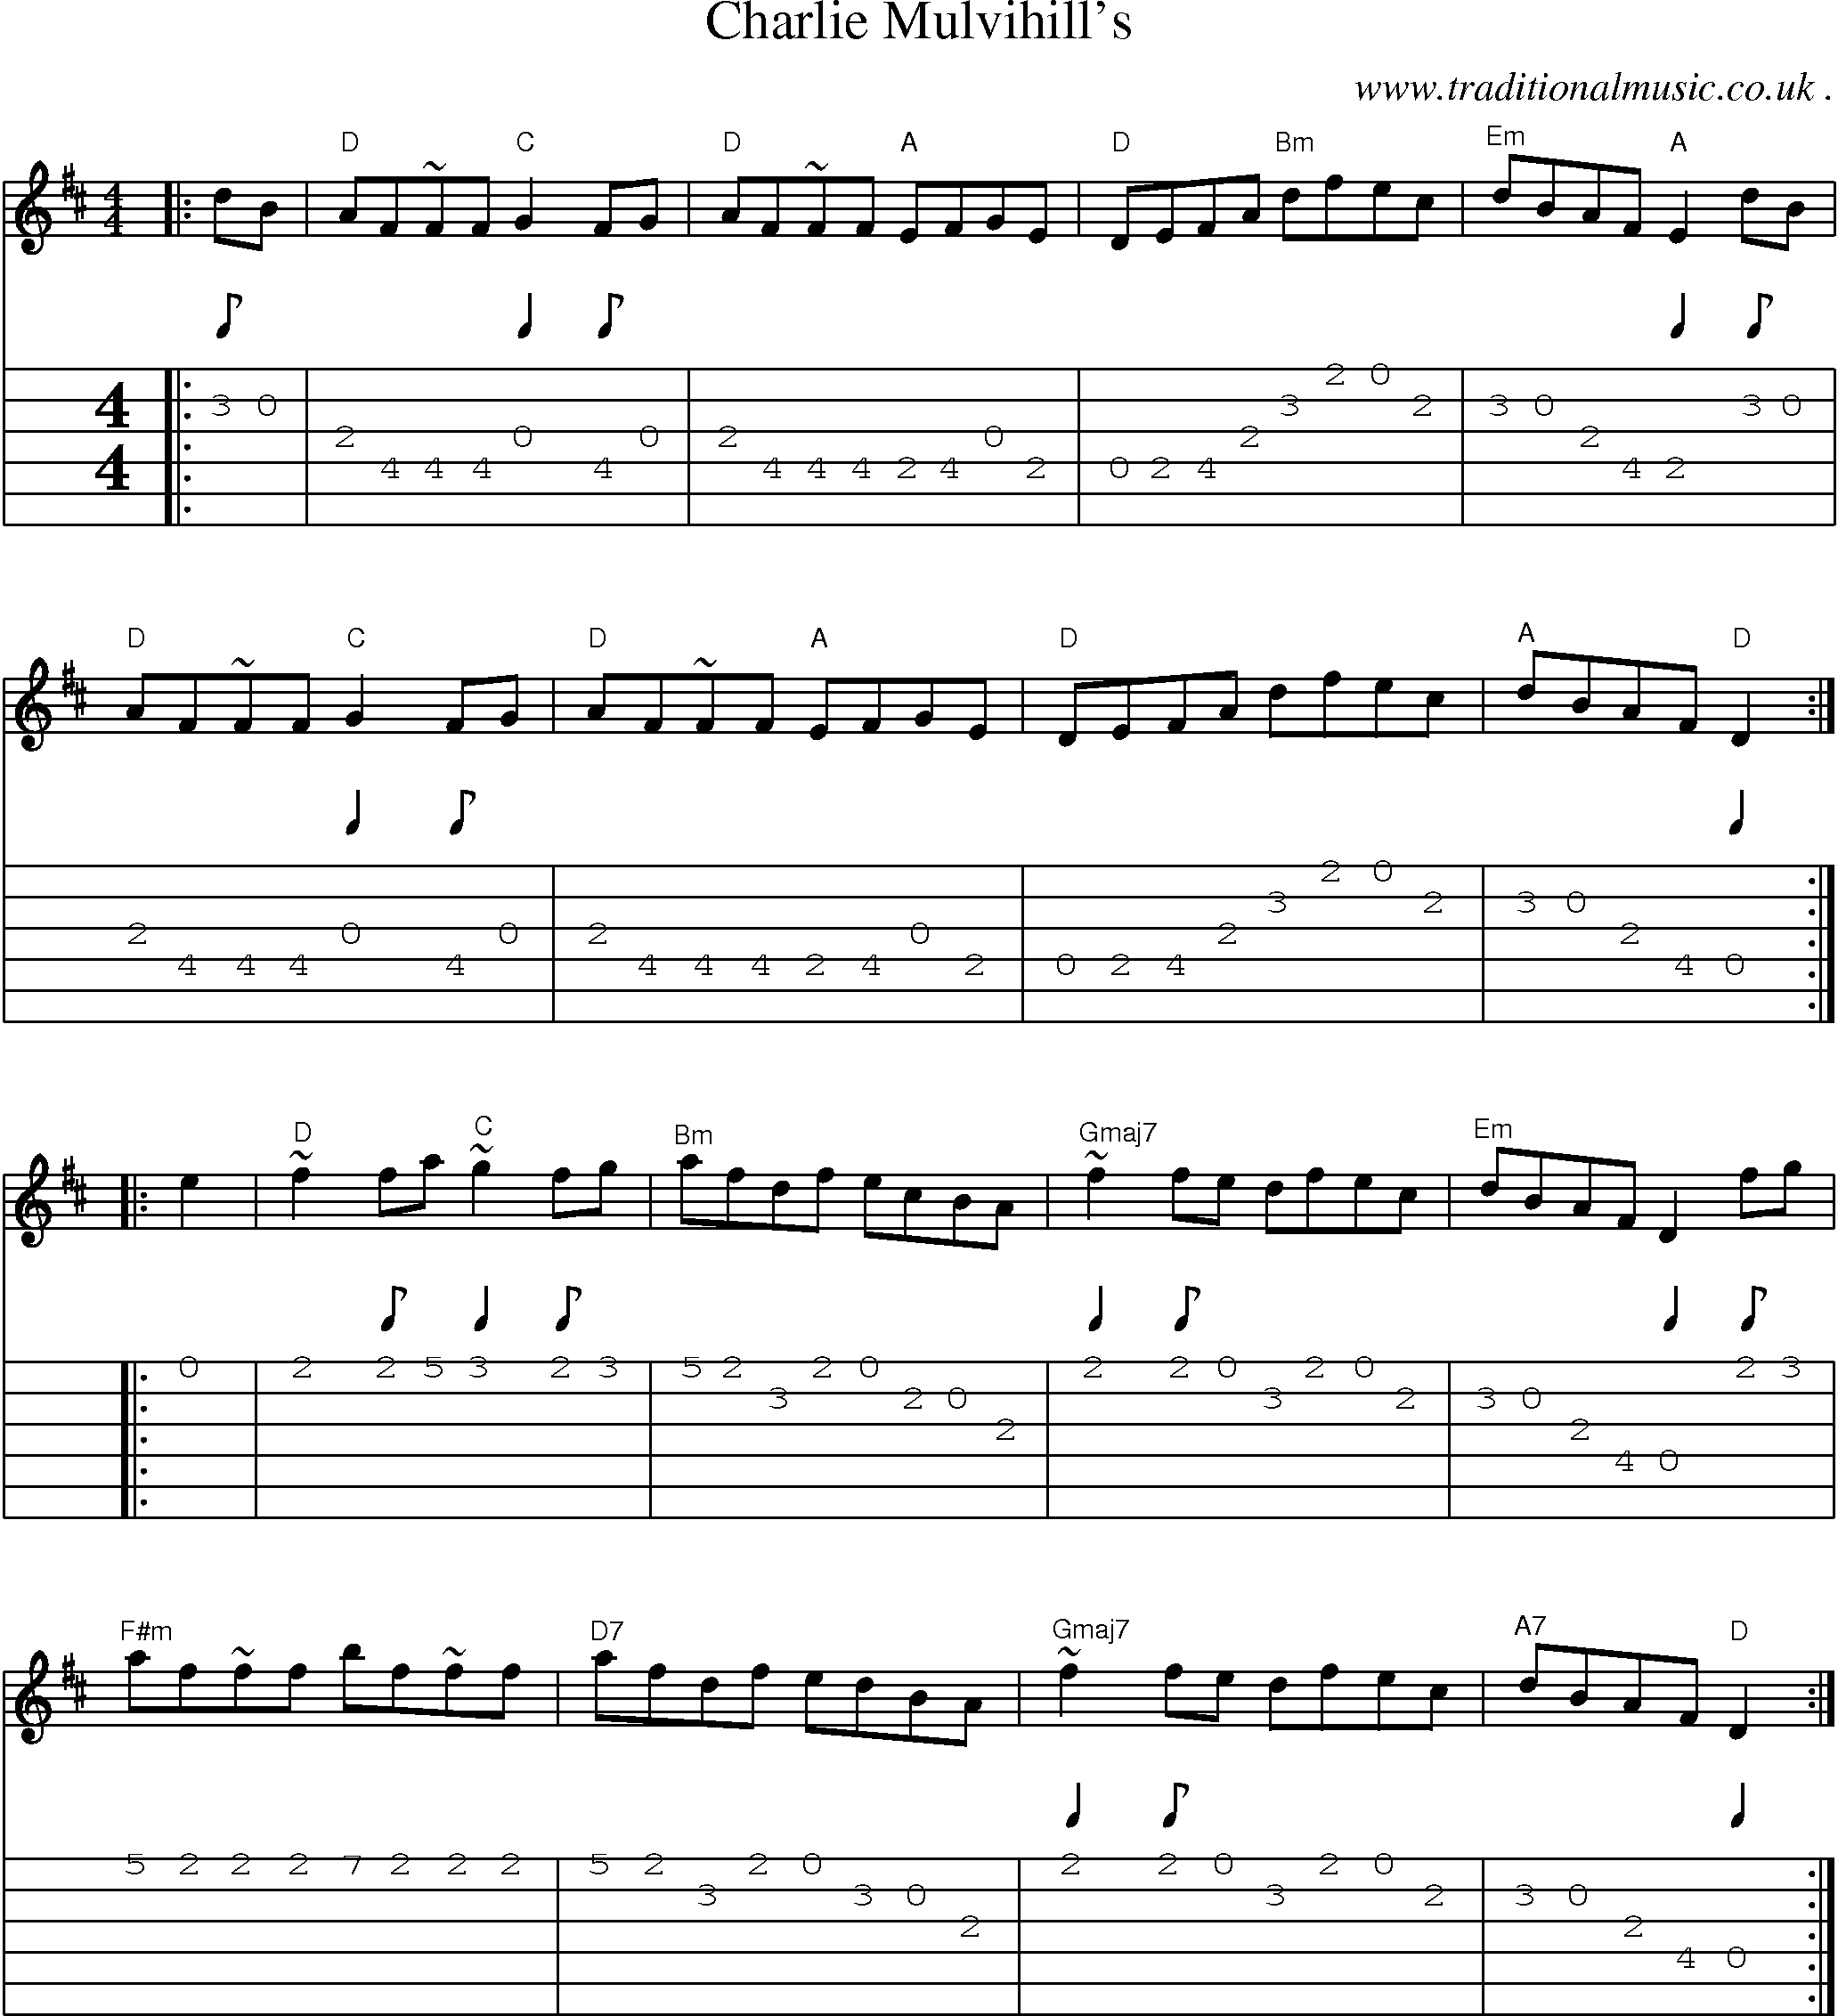 Music Score and Guitar Tabs for Charlie Mulvihills